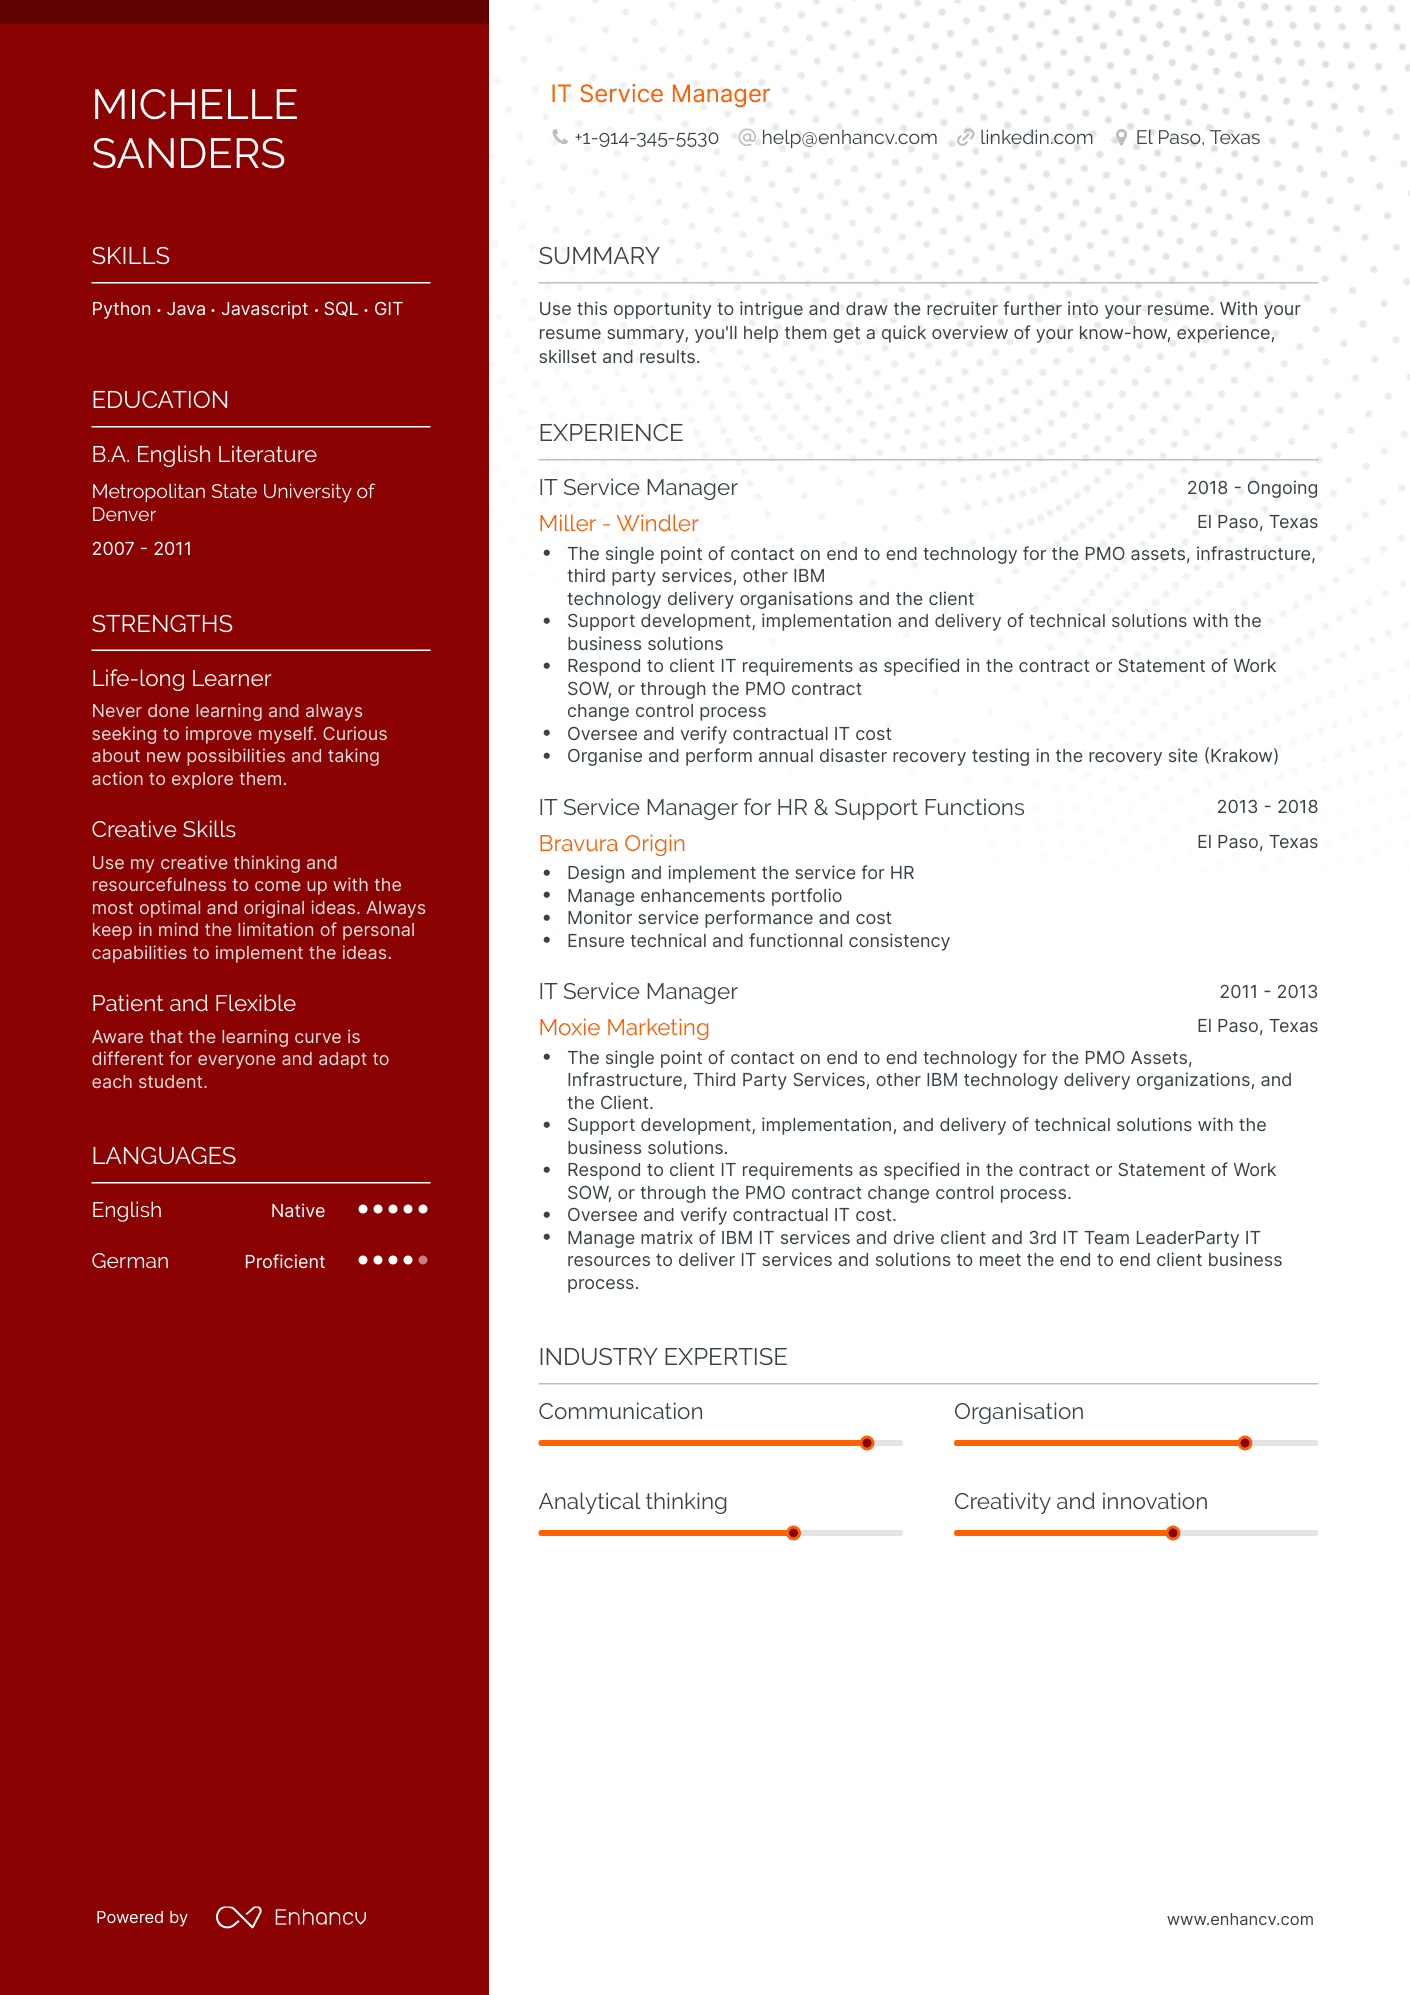 Polished IT Service Manager Resume Template